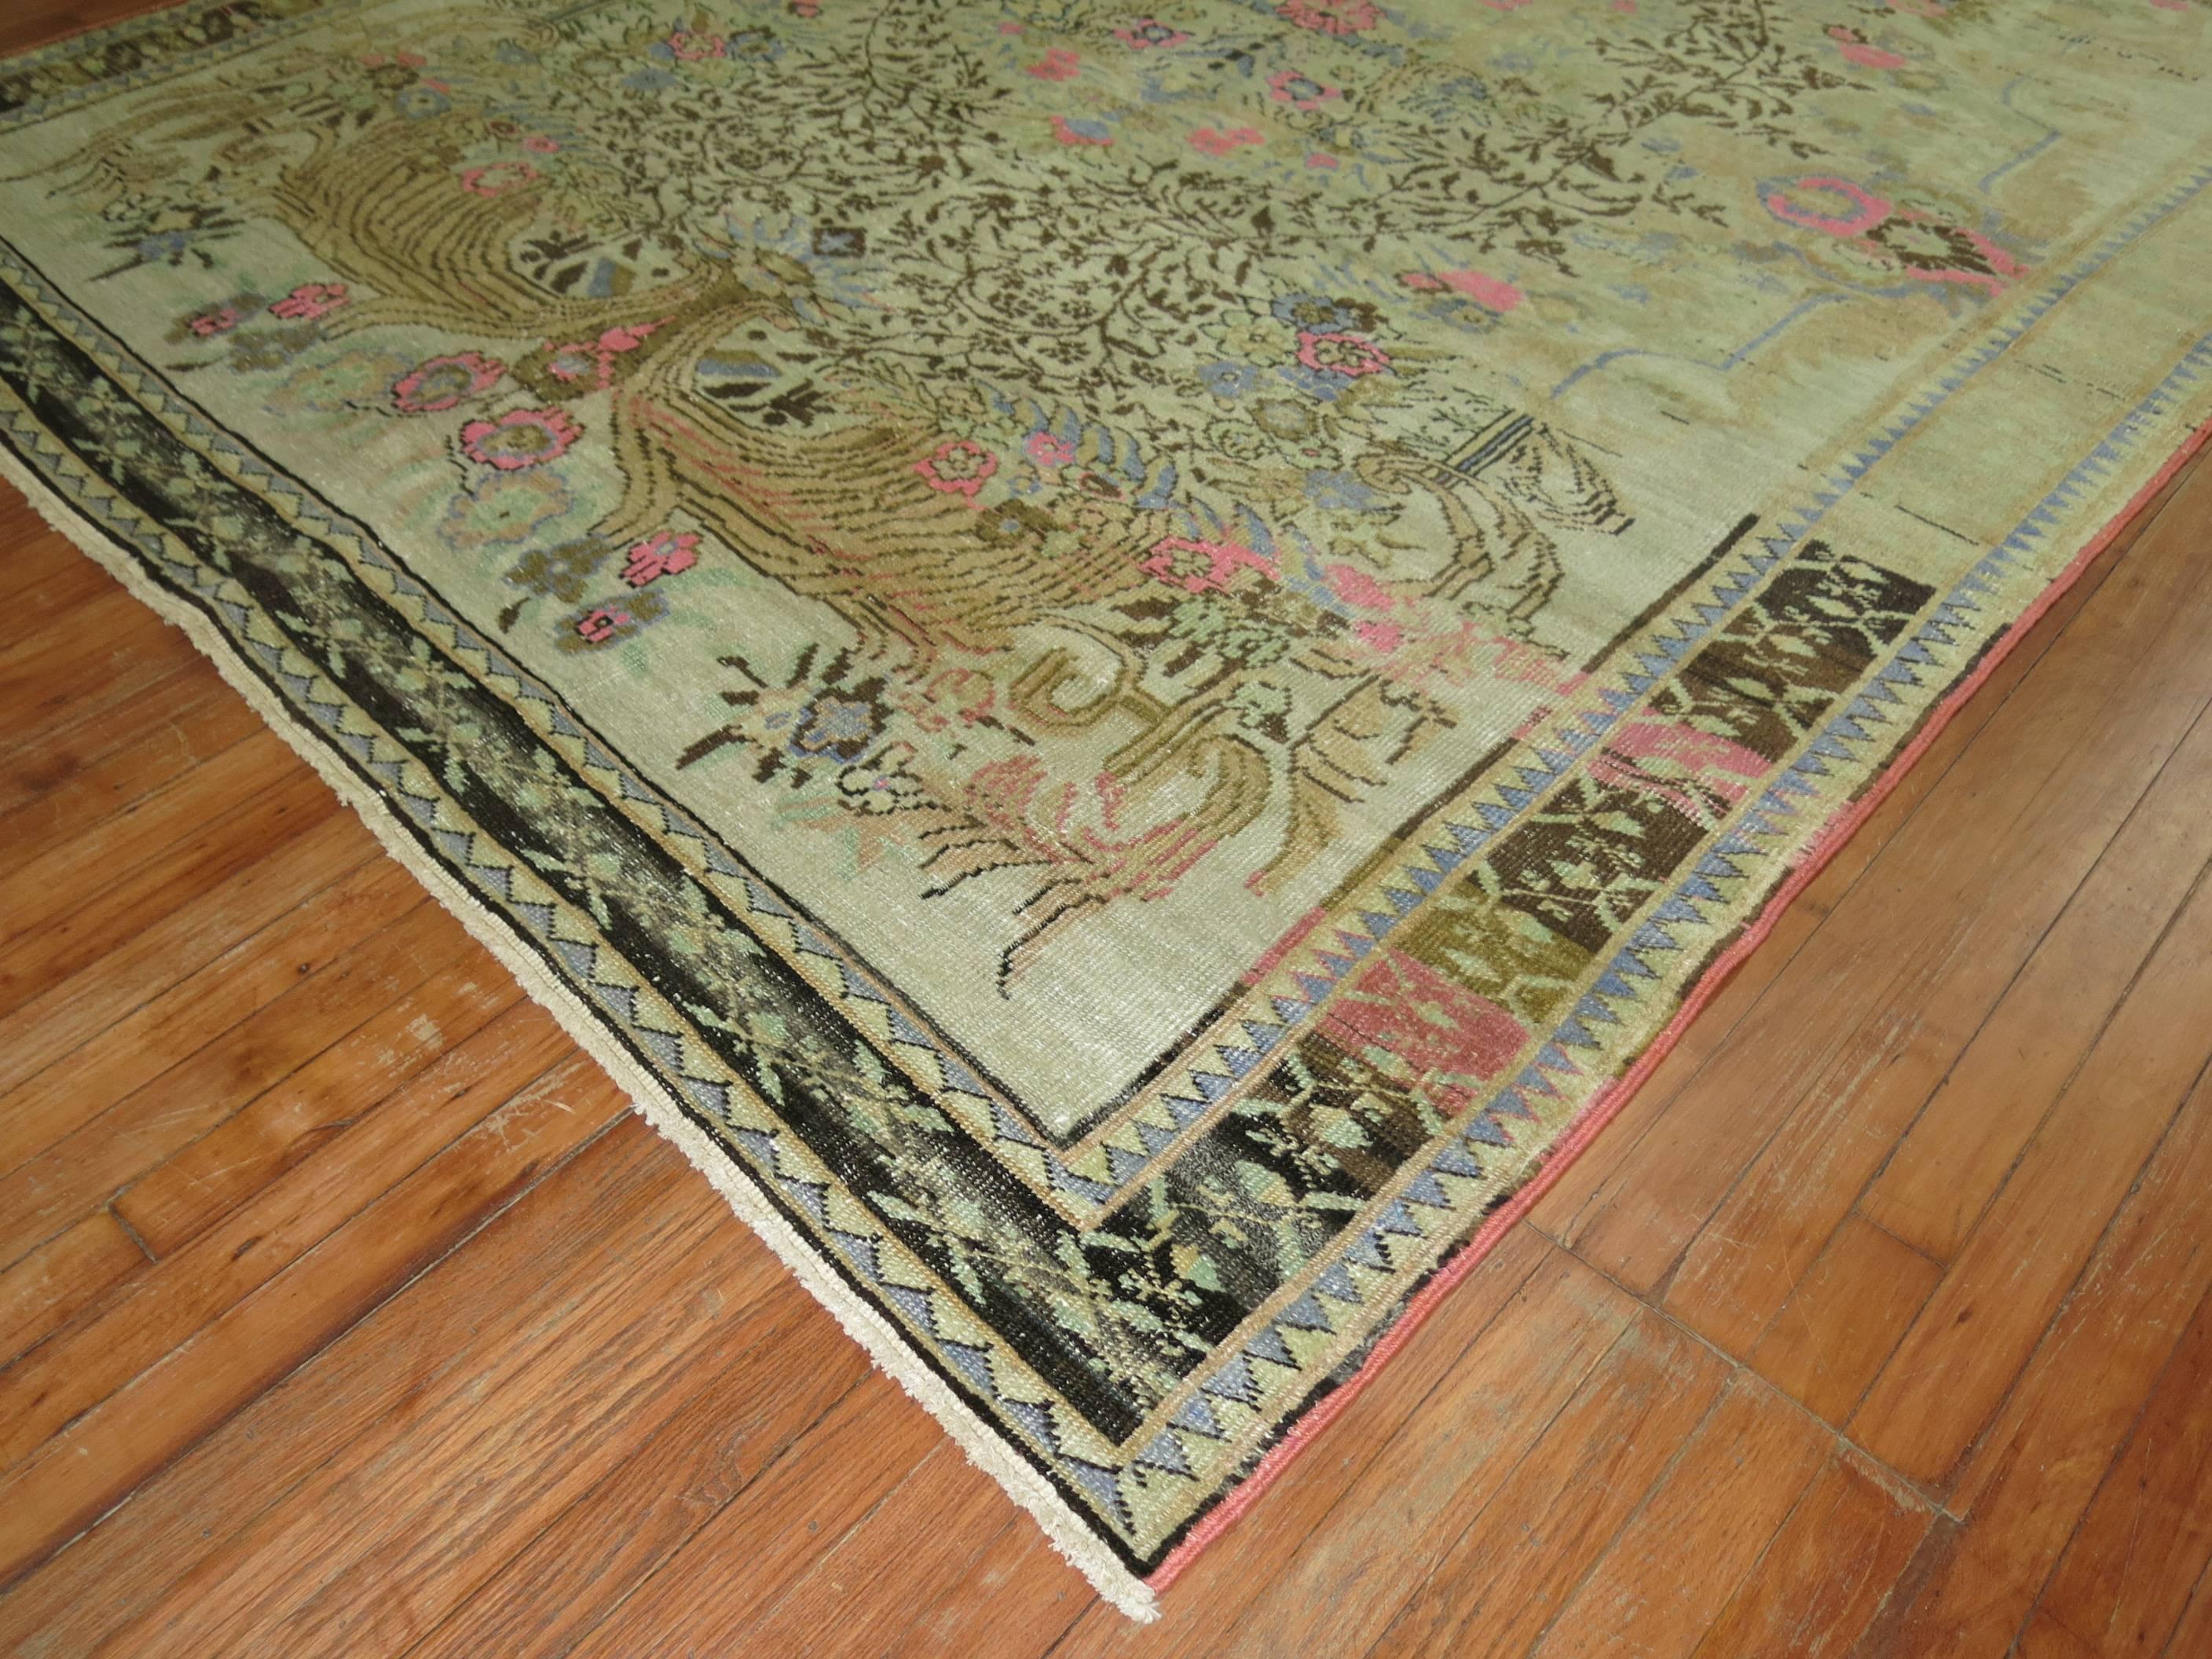 Eclectic style vintage Turkish Anatolian rug featuring bright pink accents sparkling throughout.